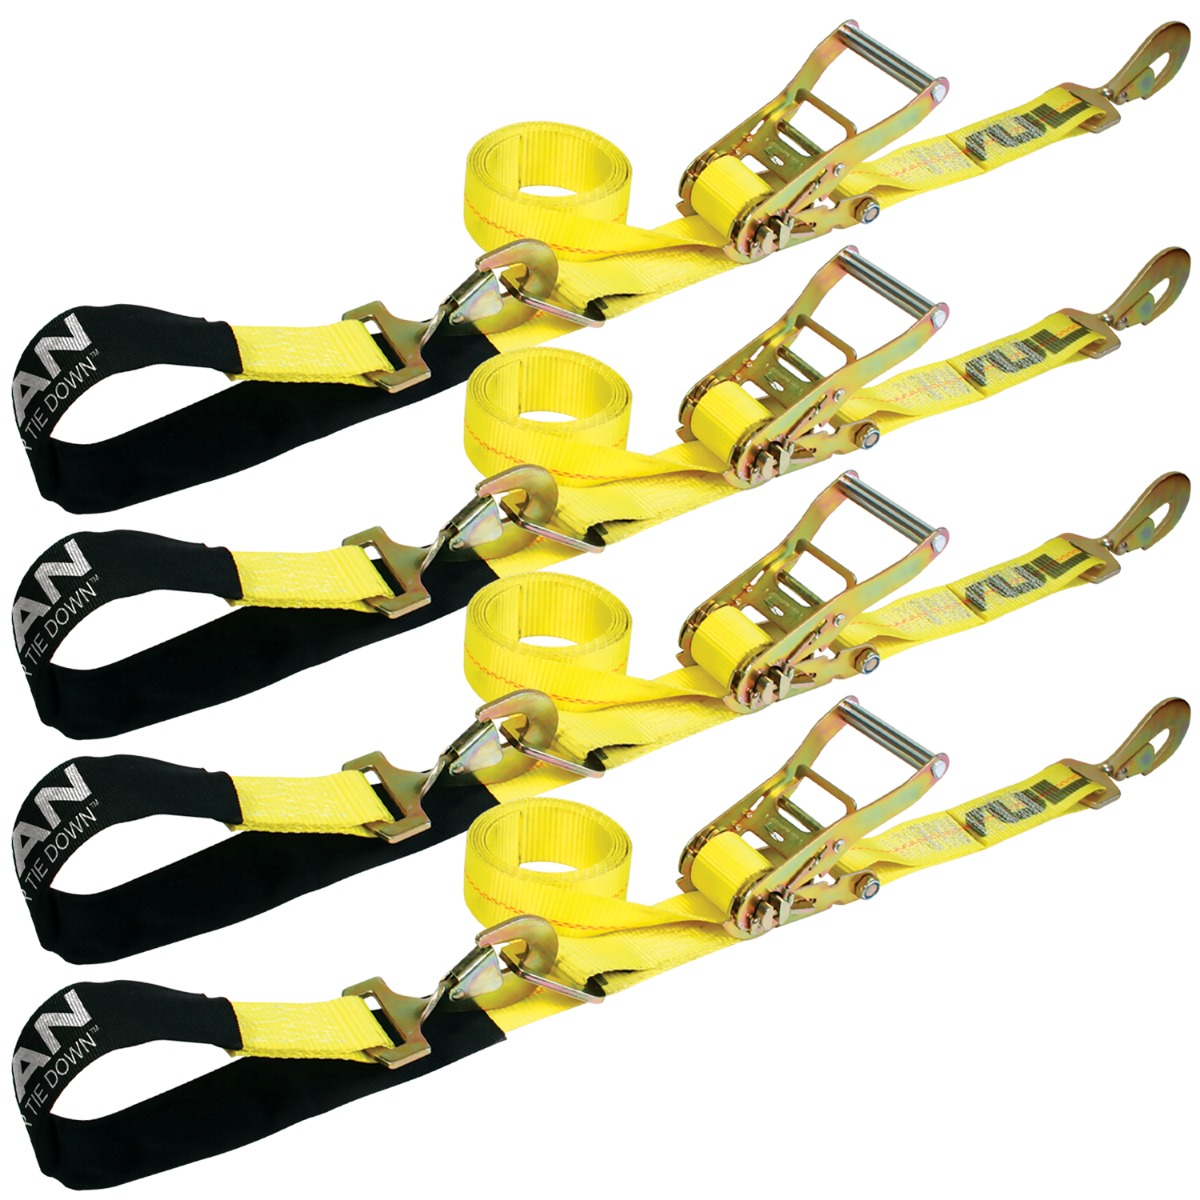 VULCAN 1-Ply Flexible Axle Tie Down Combo Strap with Snap Hook